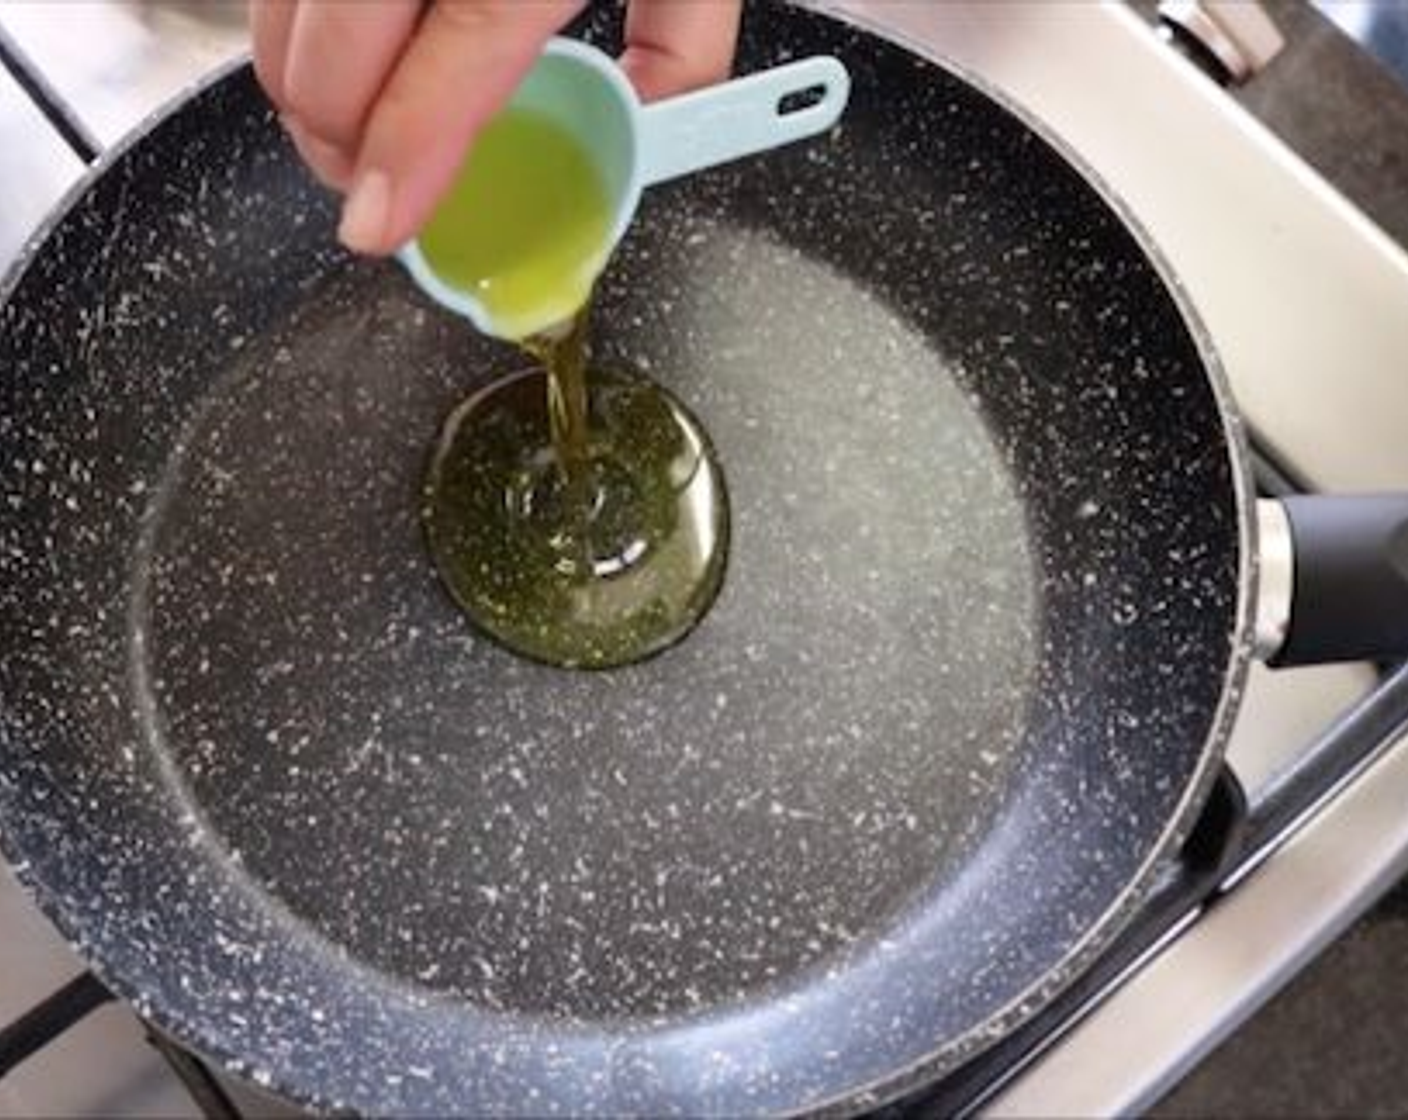 step 7 Heat a non-stick frying pan with a medium heat and add Extra-Virgin Olive Oil (2 Tbsp), about 1 minute later add the slices of garlic and spicy pepper and mix with the oil. 2 minutes later add the 1/4 cup of capers and cook for an additional 2 minutes.